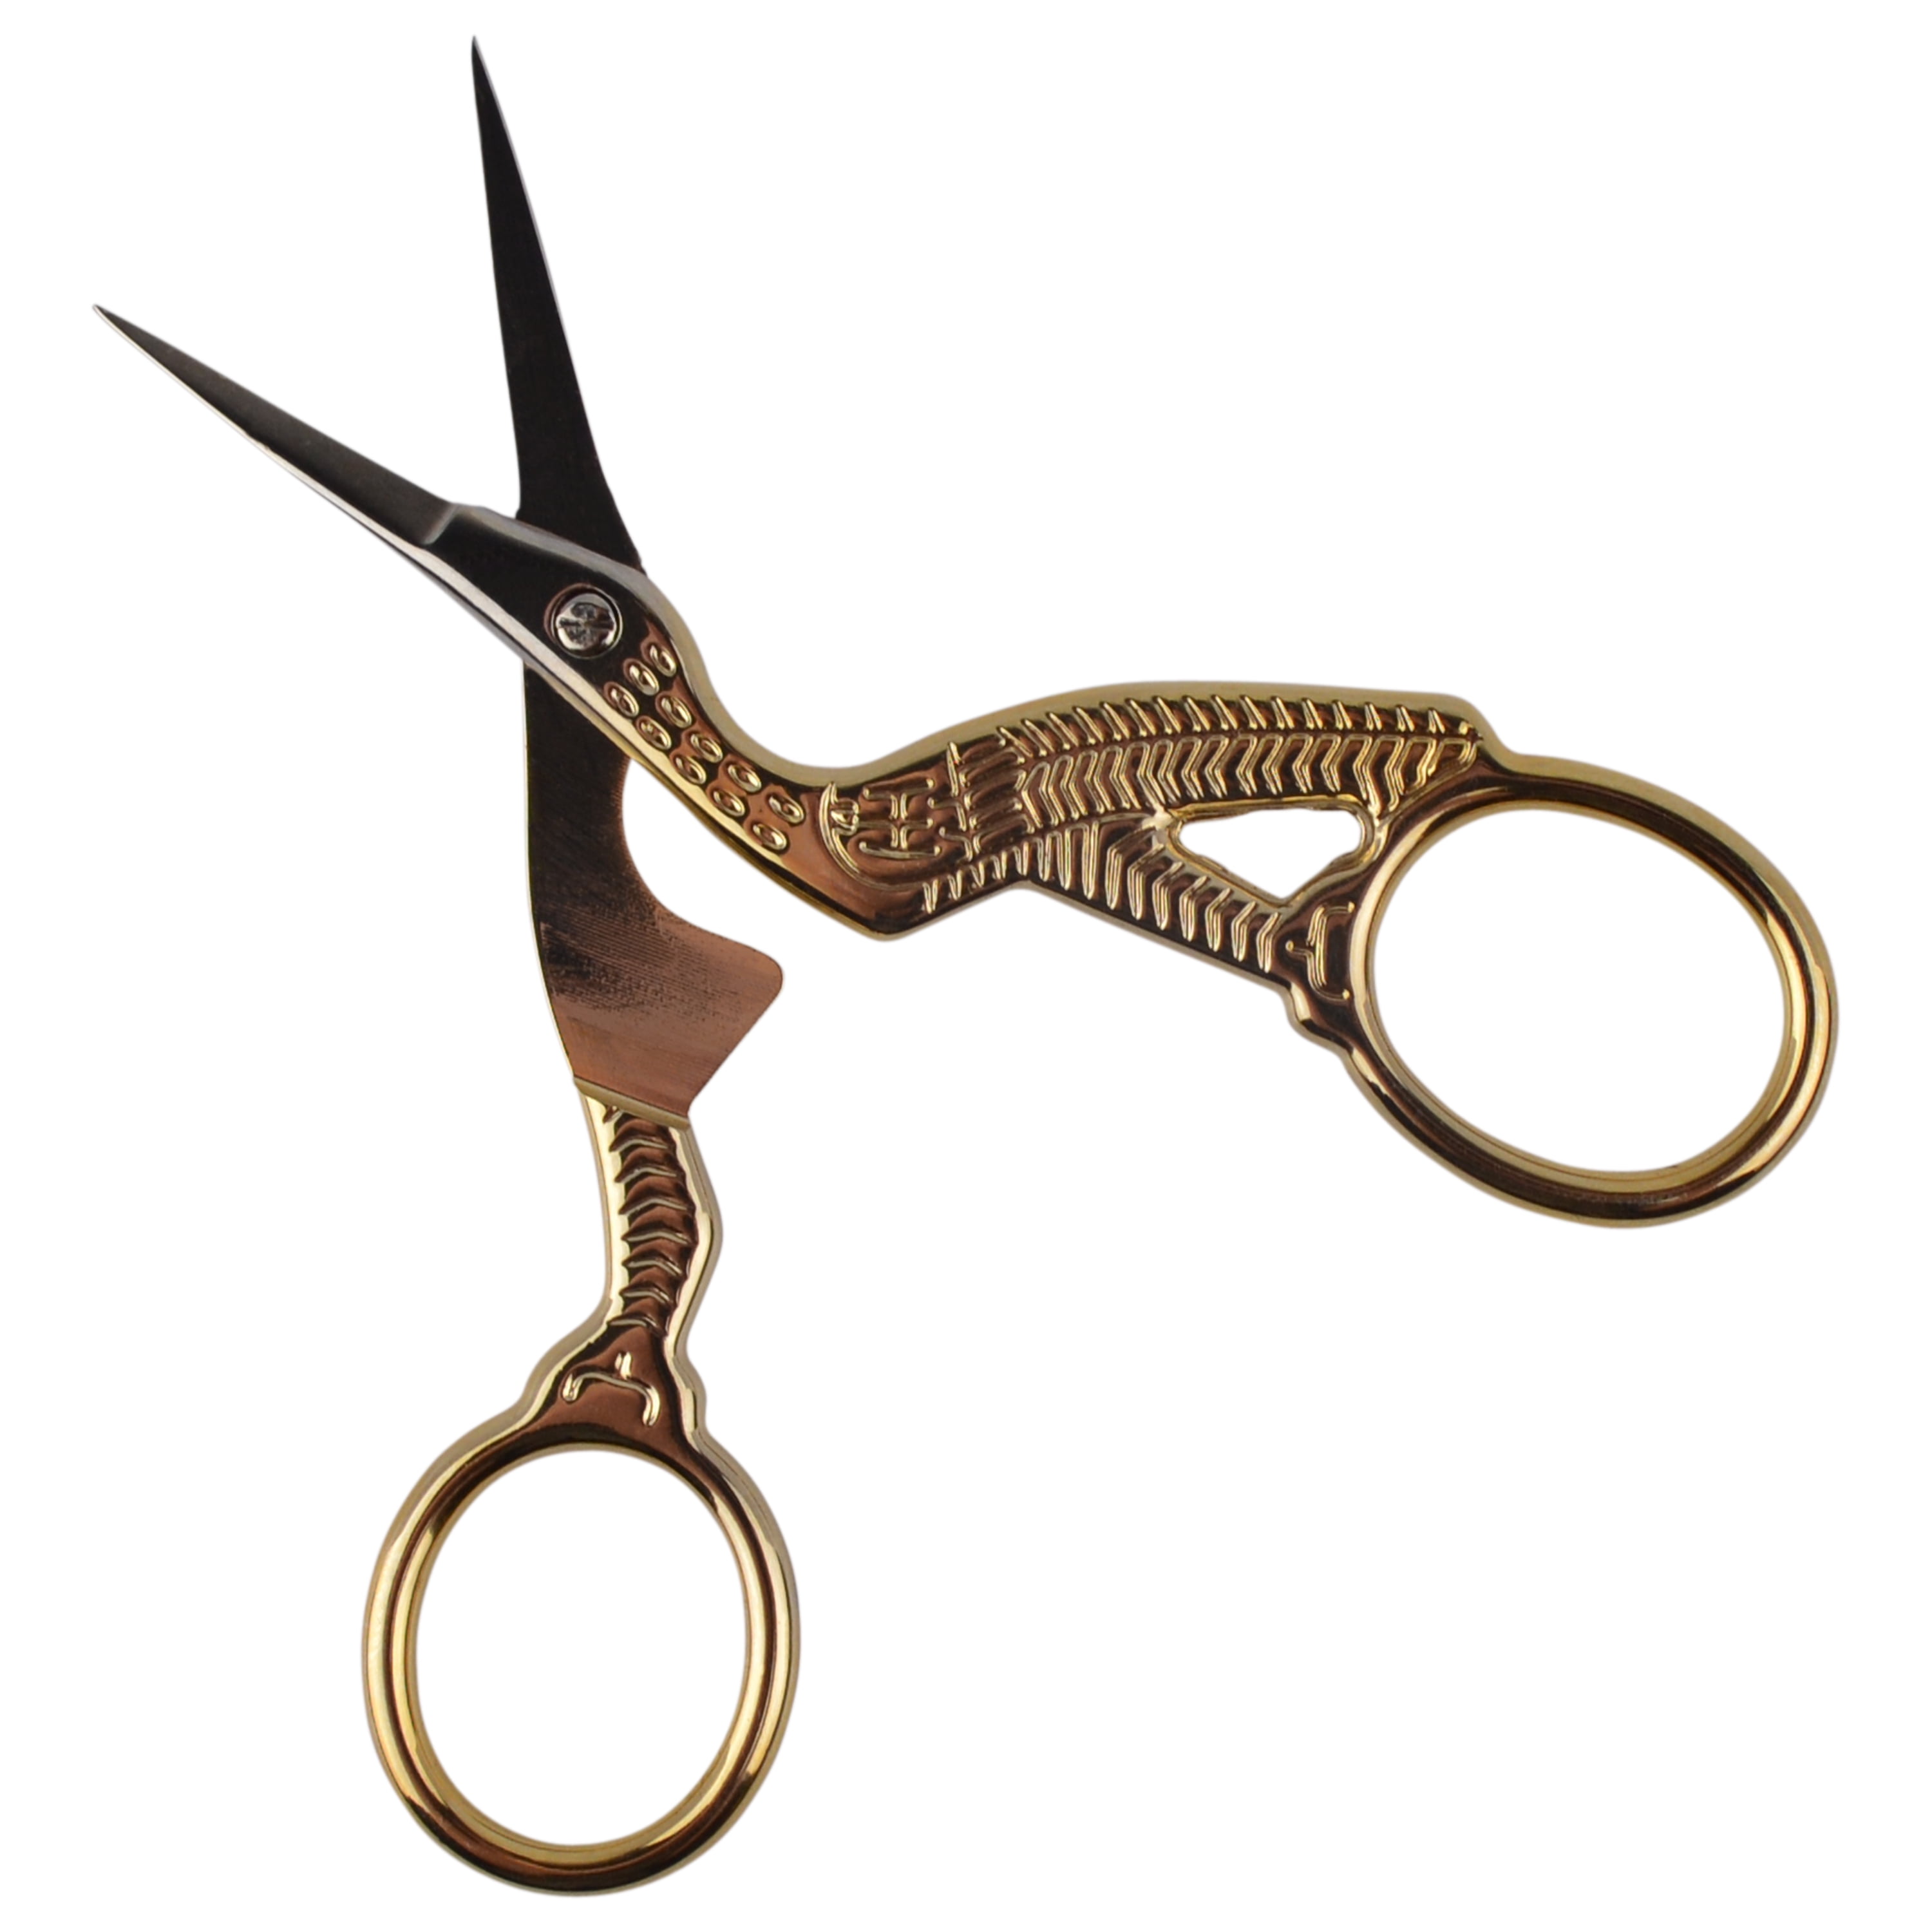 Specialty Forged 5 embroidery,sewing & trimming Scissors,all steel gold  plated